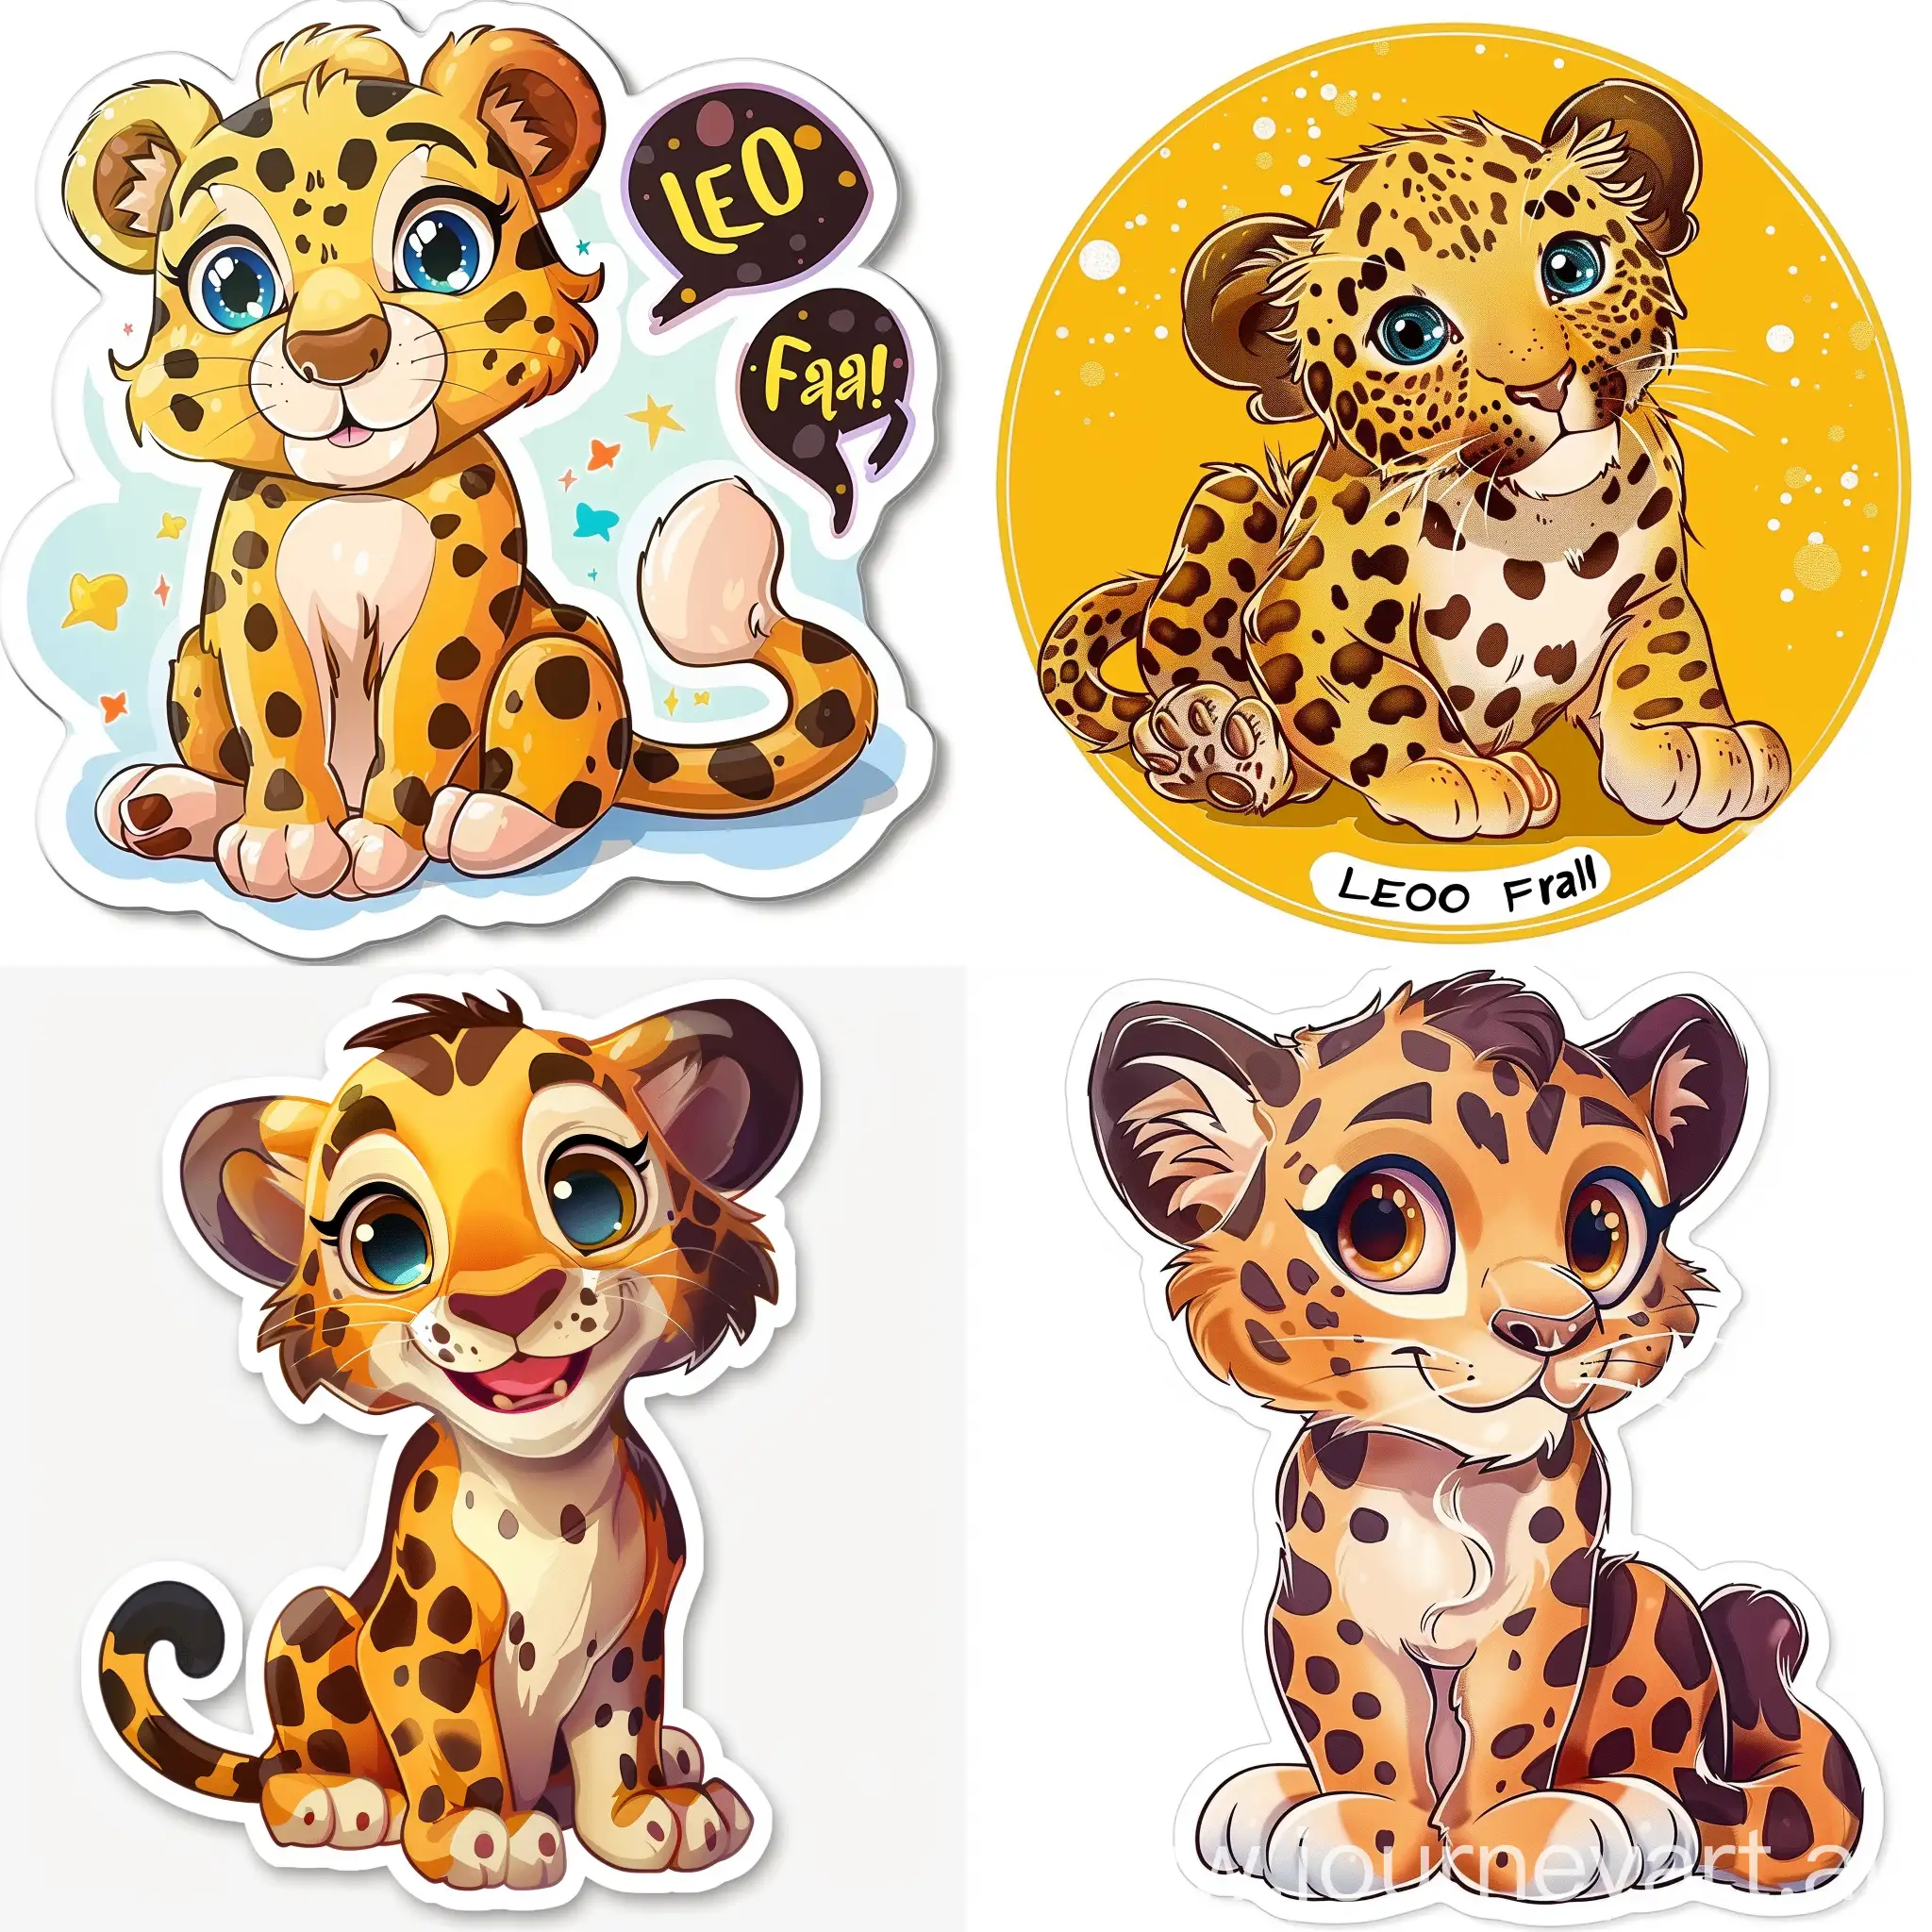 sticker cute Leopard with in the image "Leo Fart"